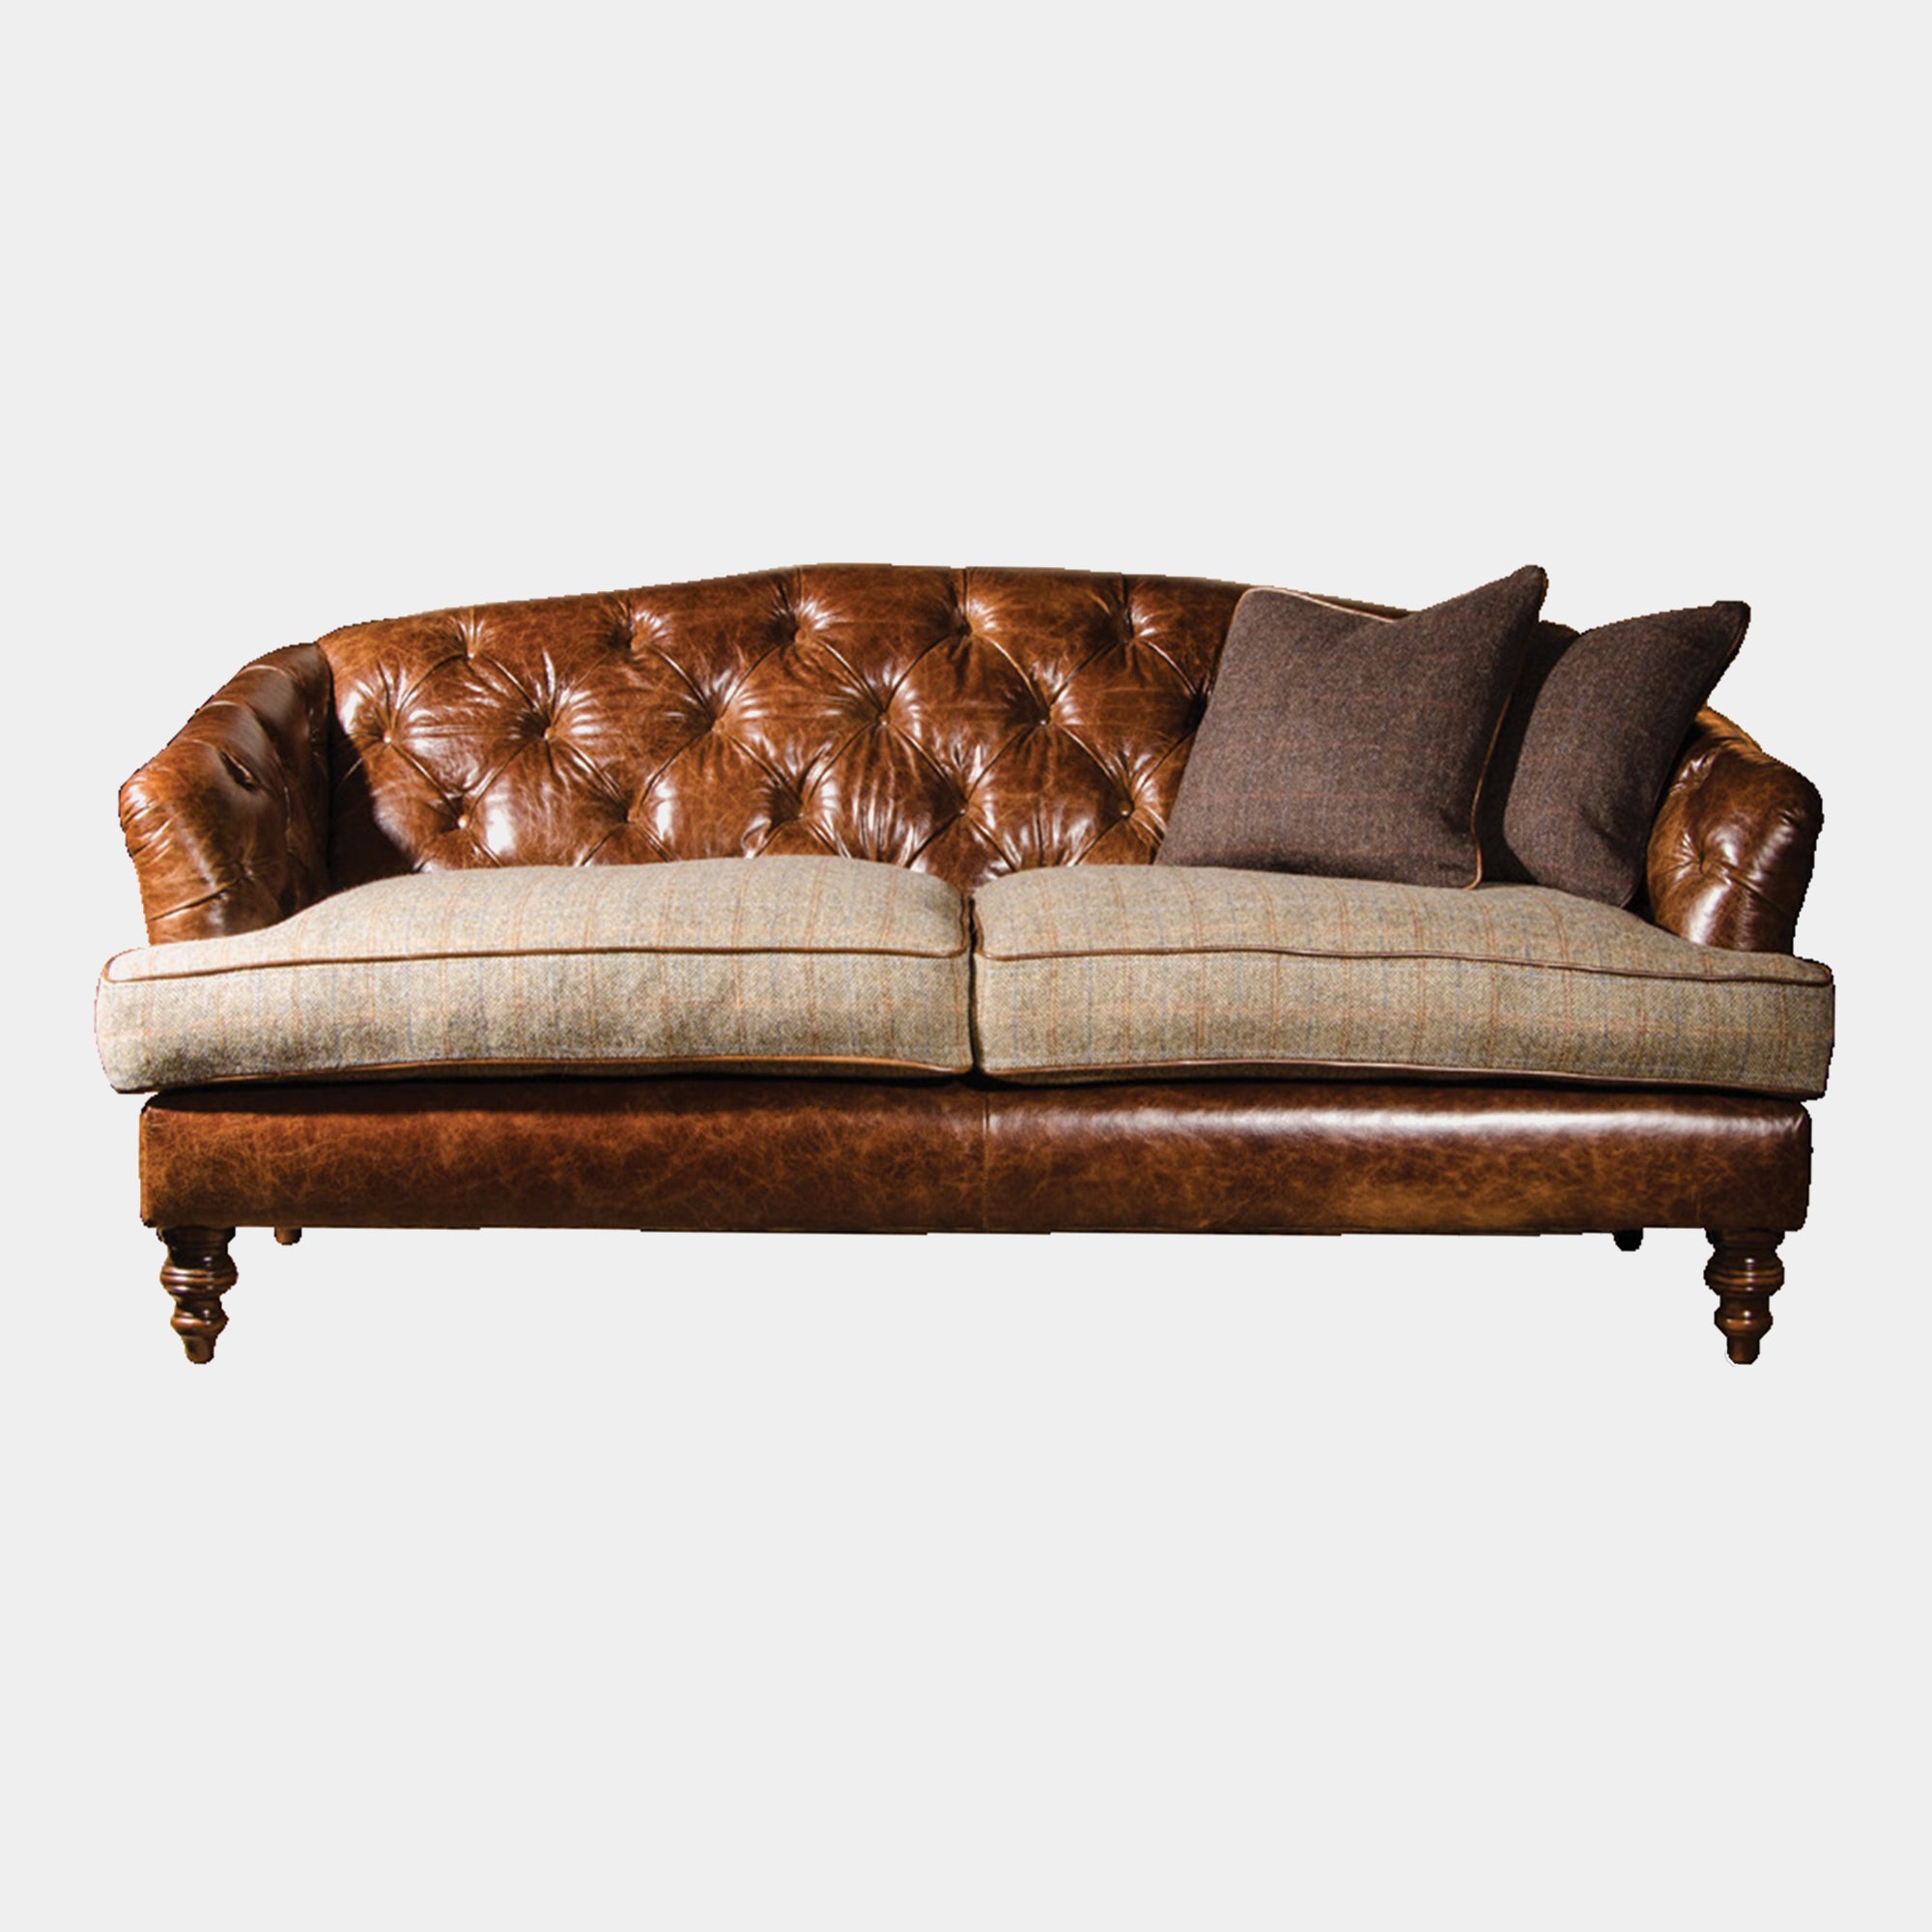 Harris Tweed Petit Sofa - Option B - Leather Frame With Harris Tweed Seats Piped In Leather